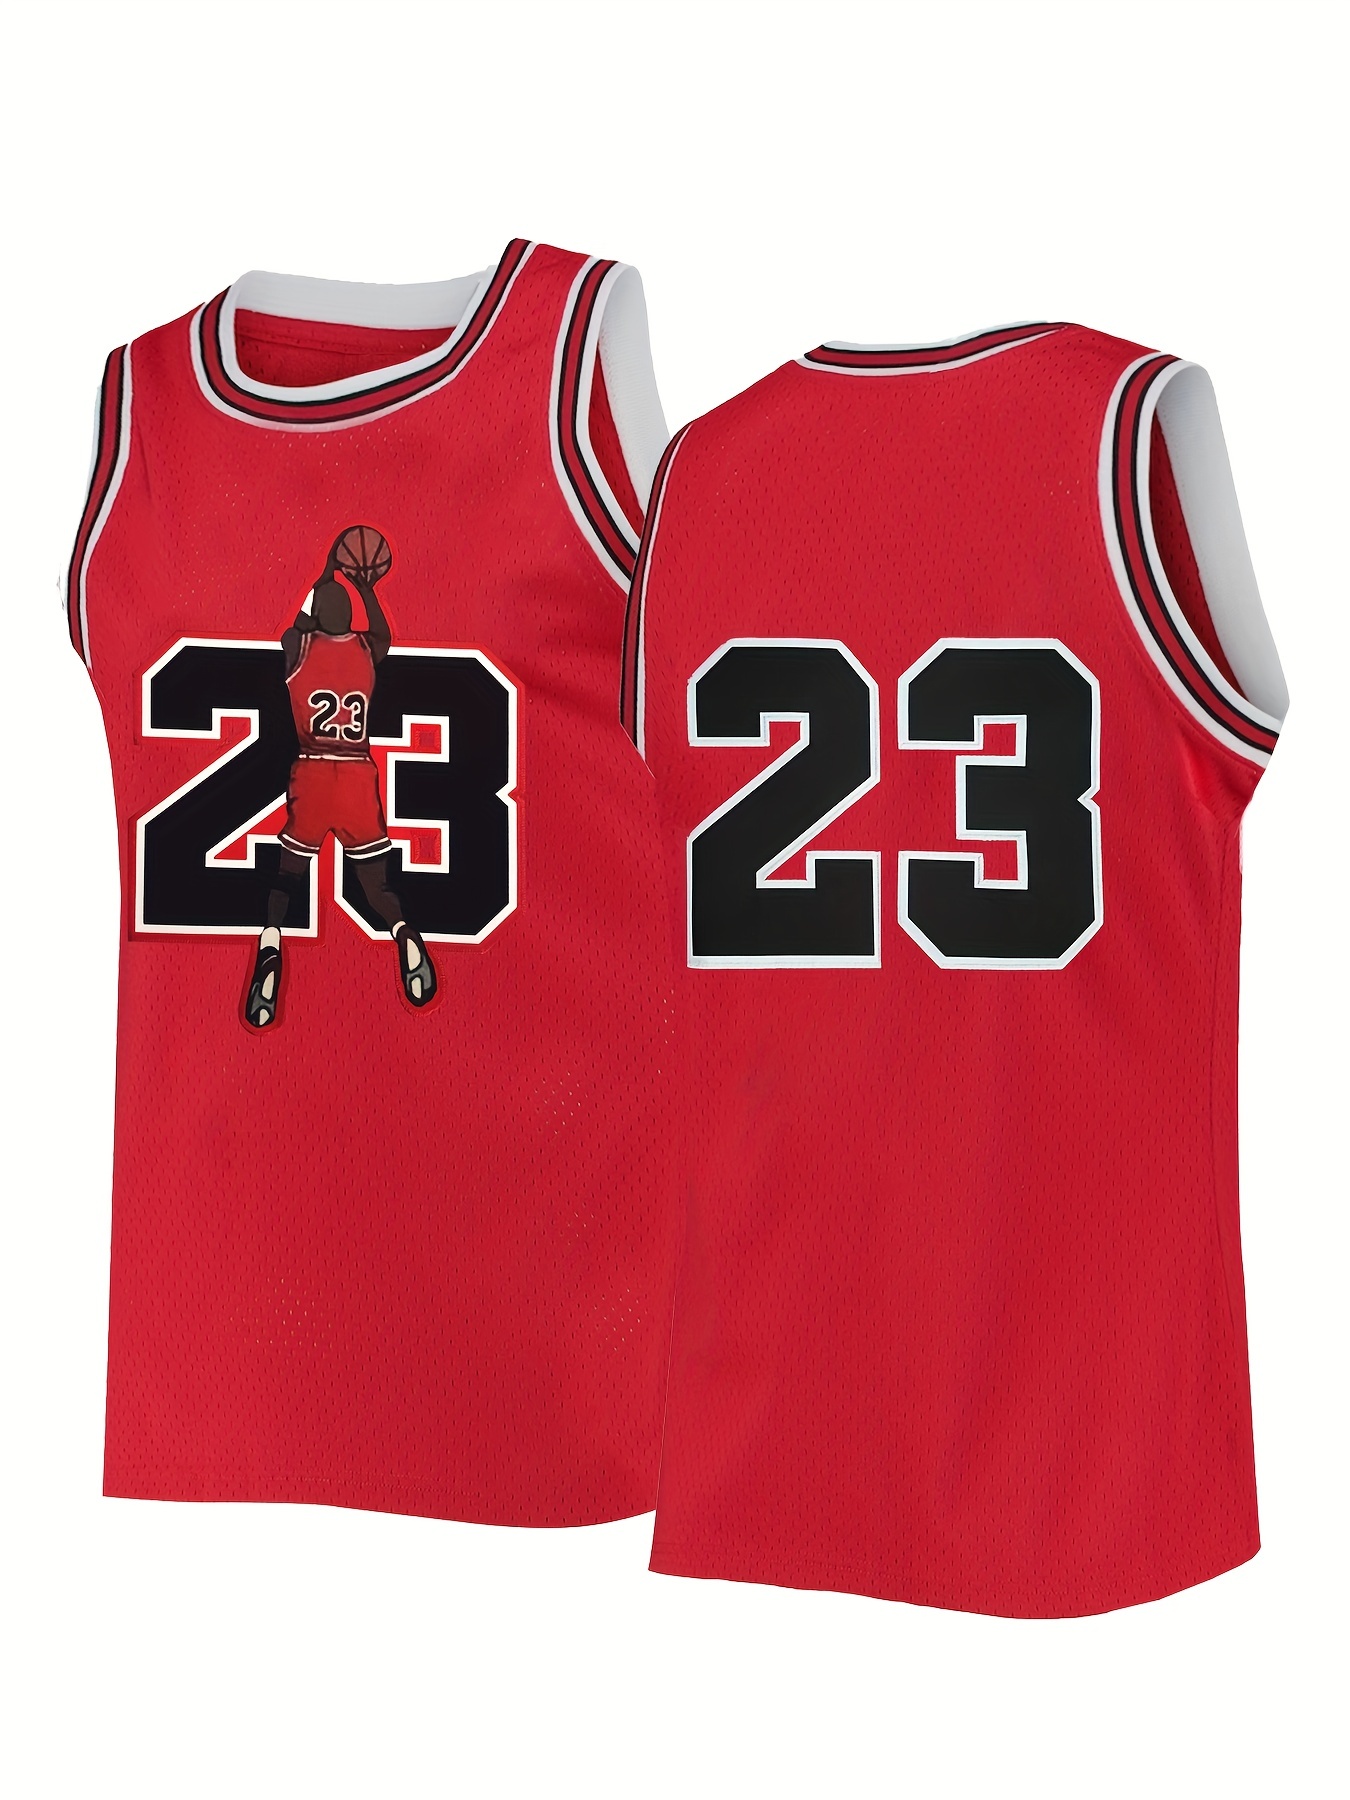 NBA Official Throwback Jersey TT$300 №24481 in South West - Men's